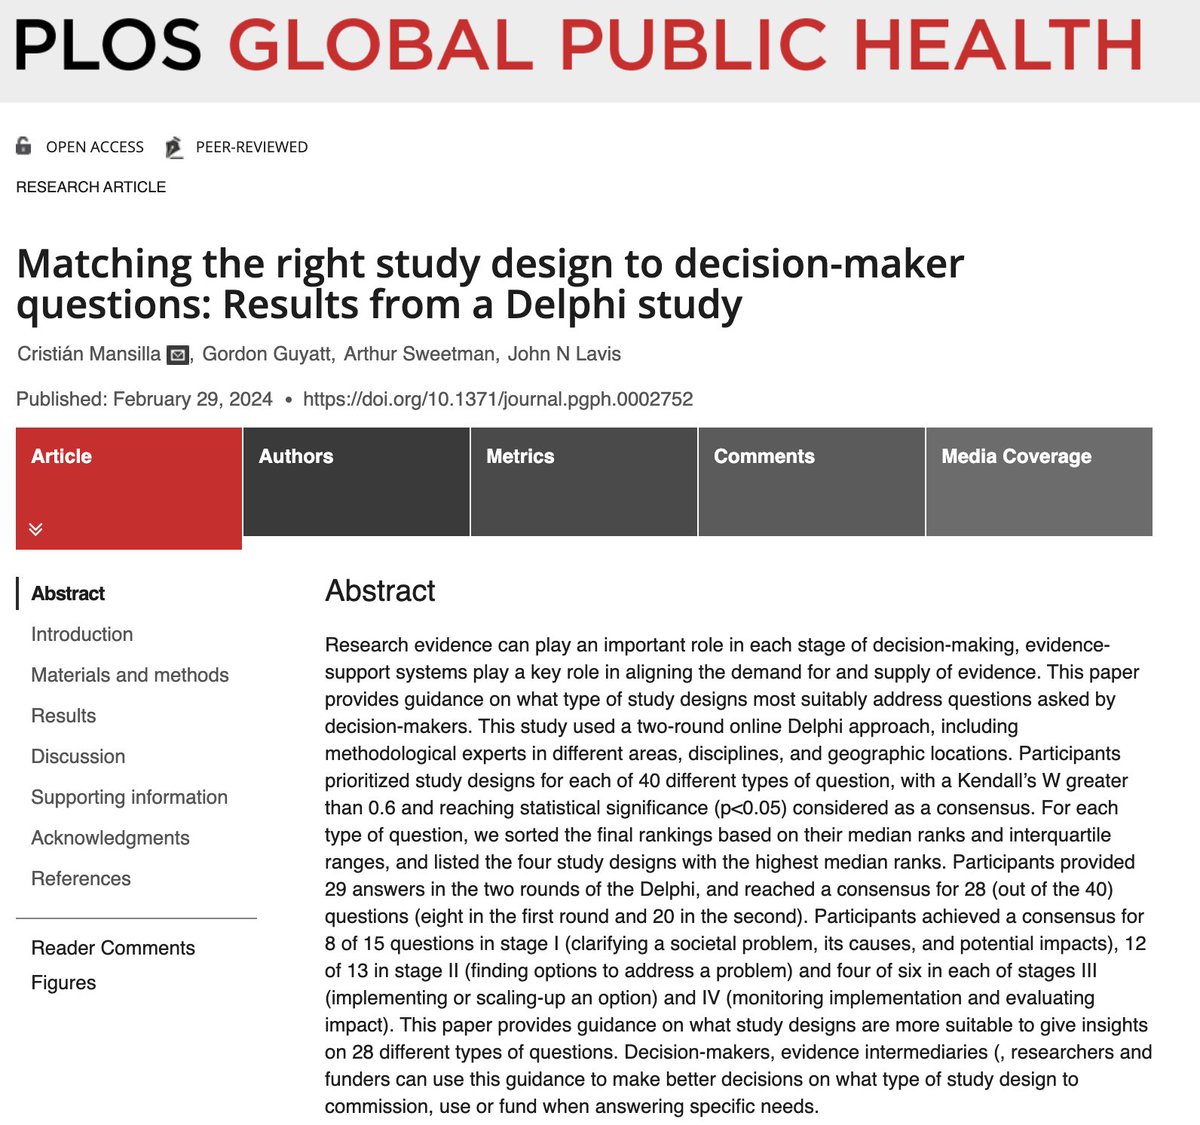 By identifying the type of question that decision makers are asking, evidence intermediaries can either search or commission a study using a design that would be well suited to address that particular need. Read more in this article published by @PLOSGPH journals.plos.org/globalpubliche…